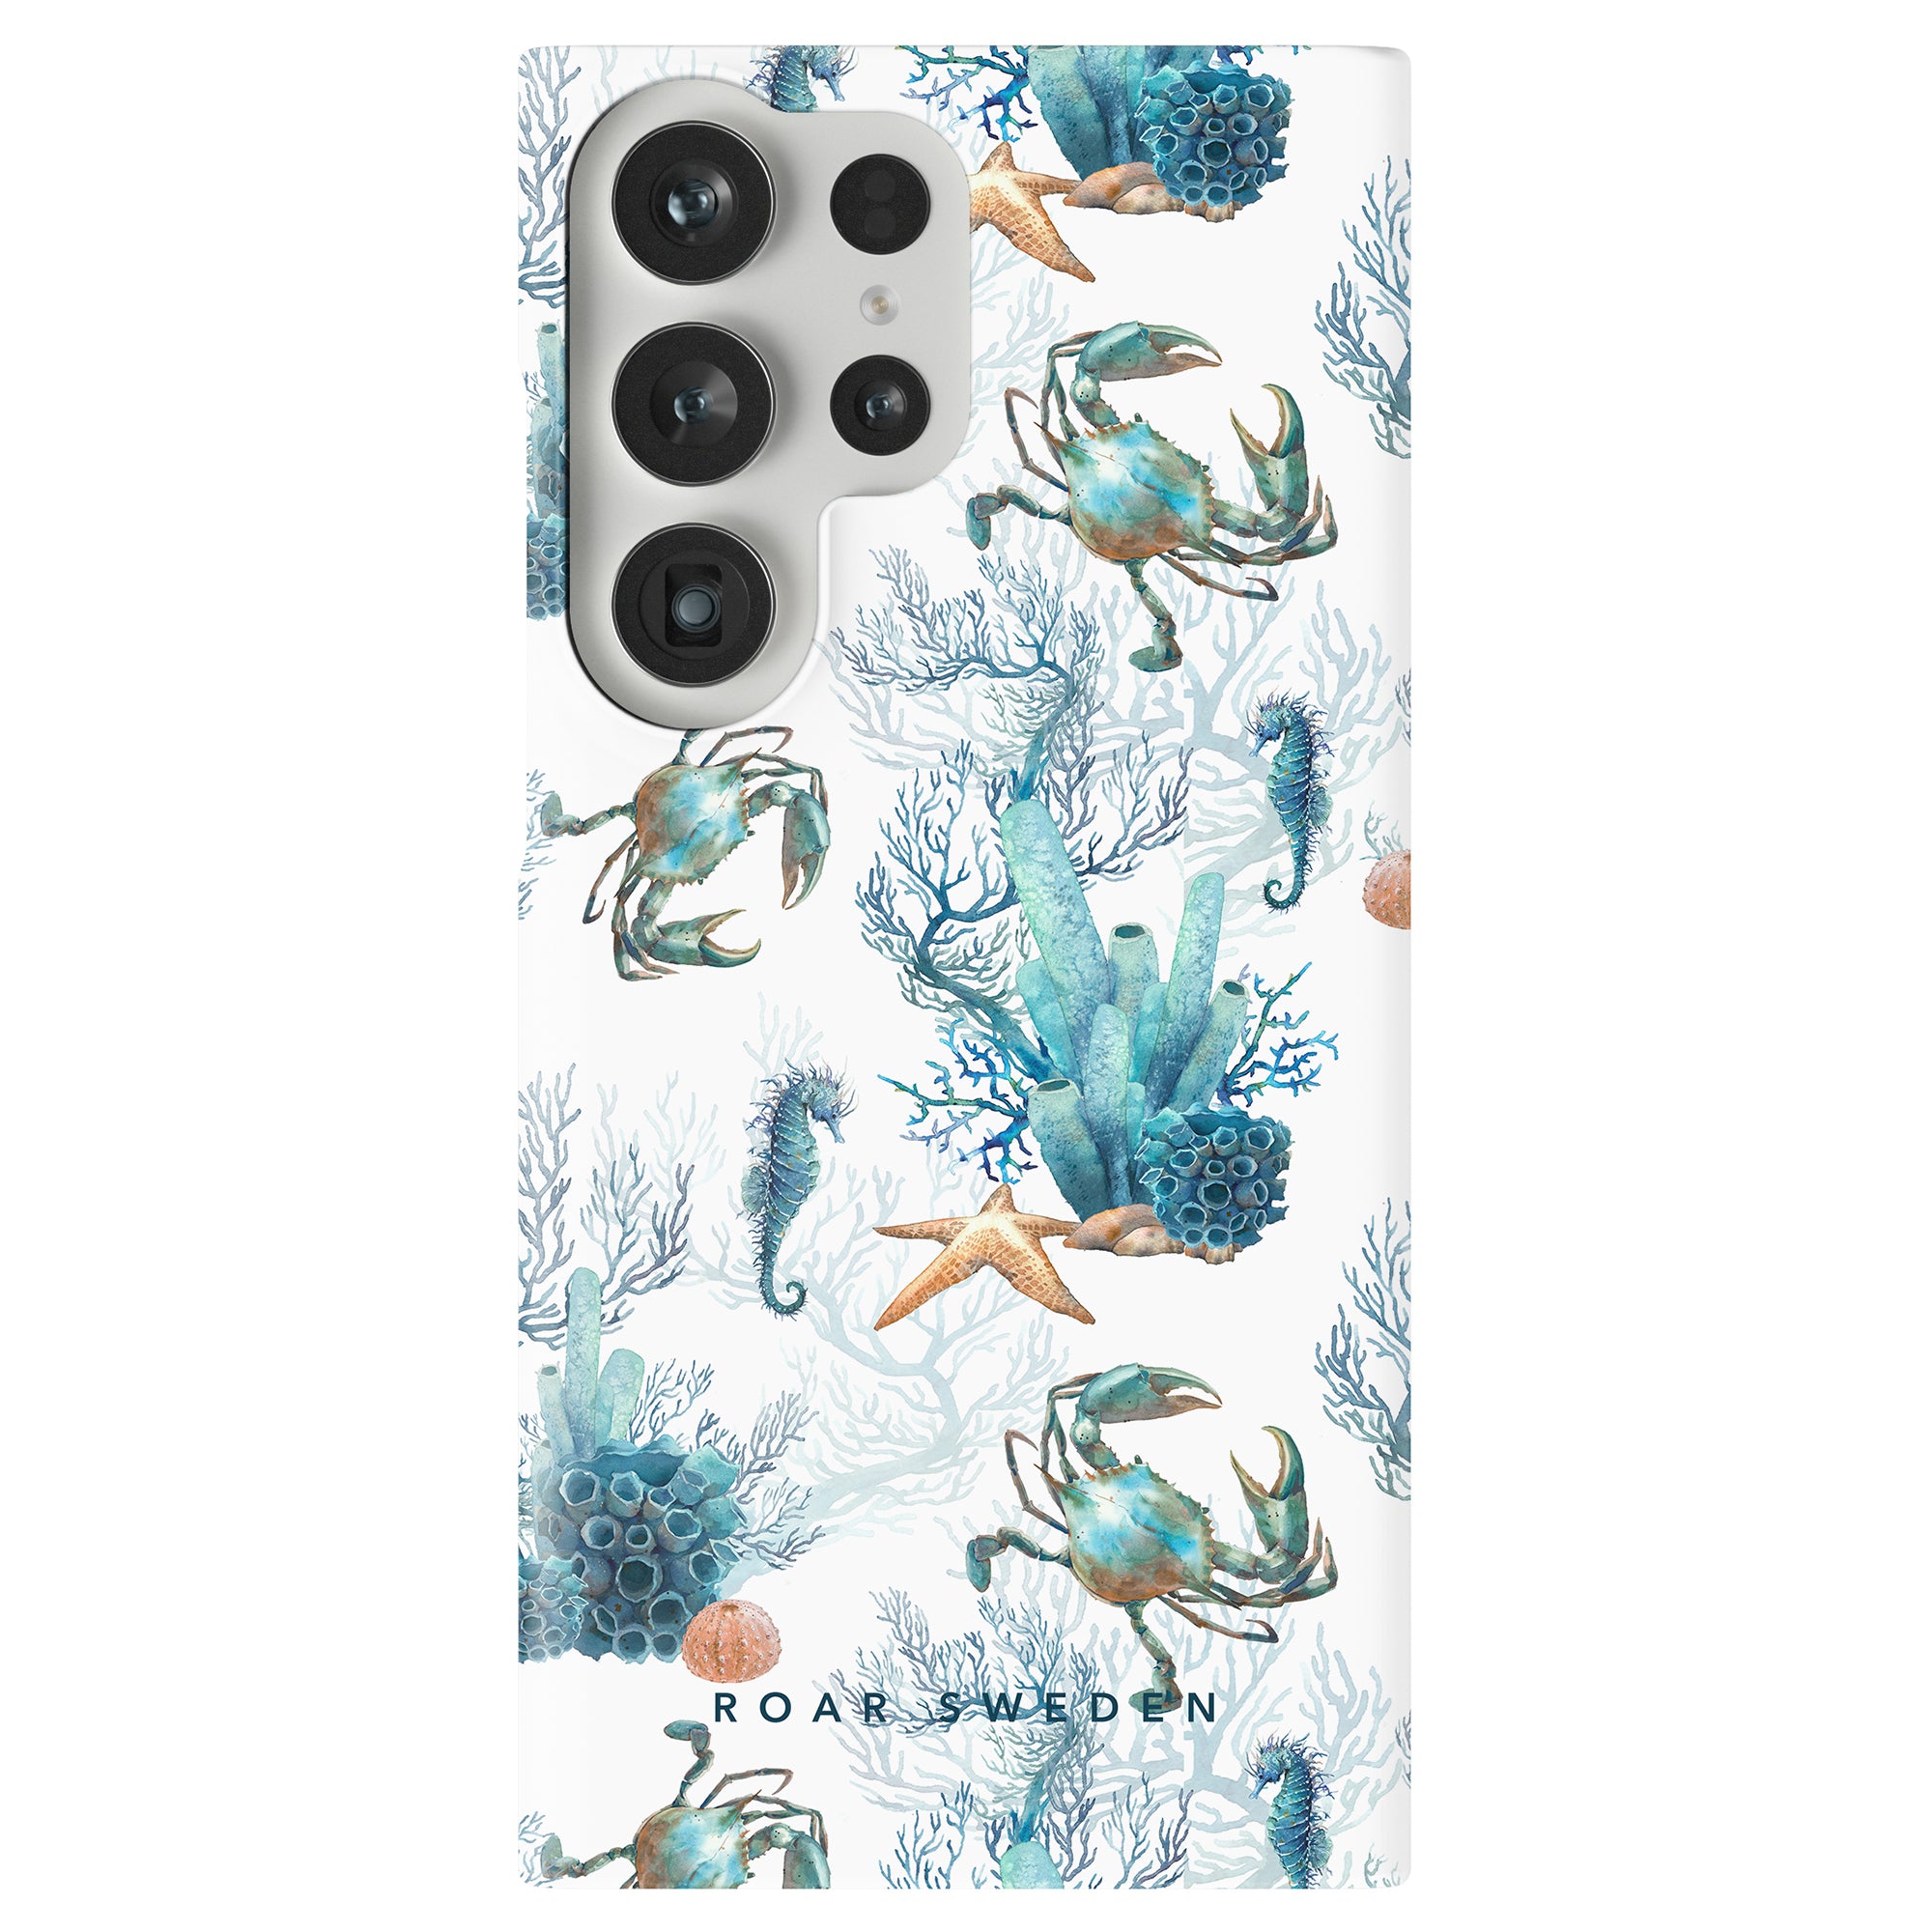 A smartphone with a Crab Reef - Slim case, this product description highlights illustrations of crabs, starfish, and coral.